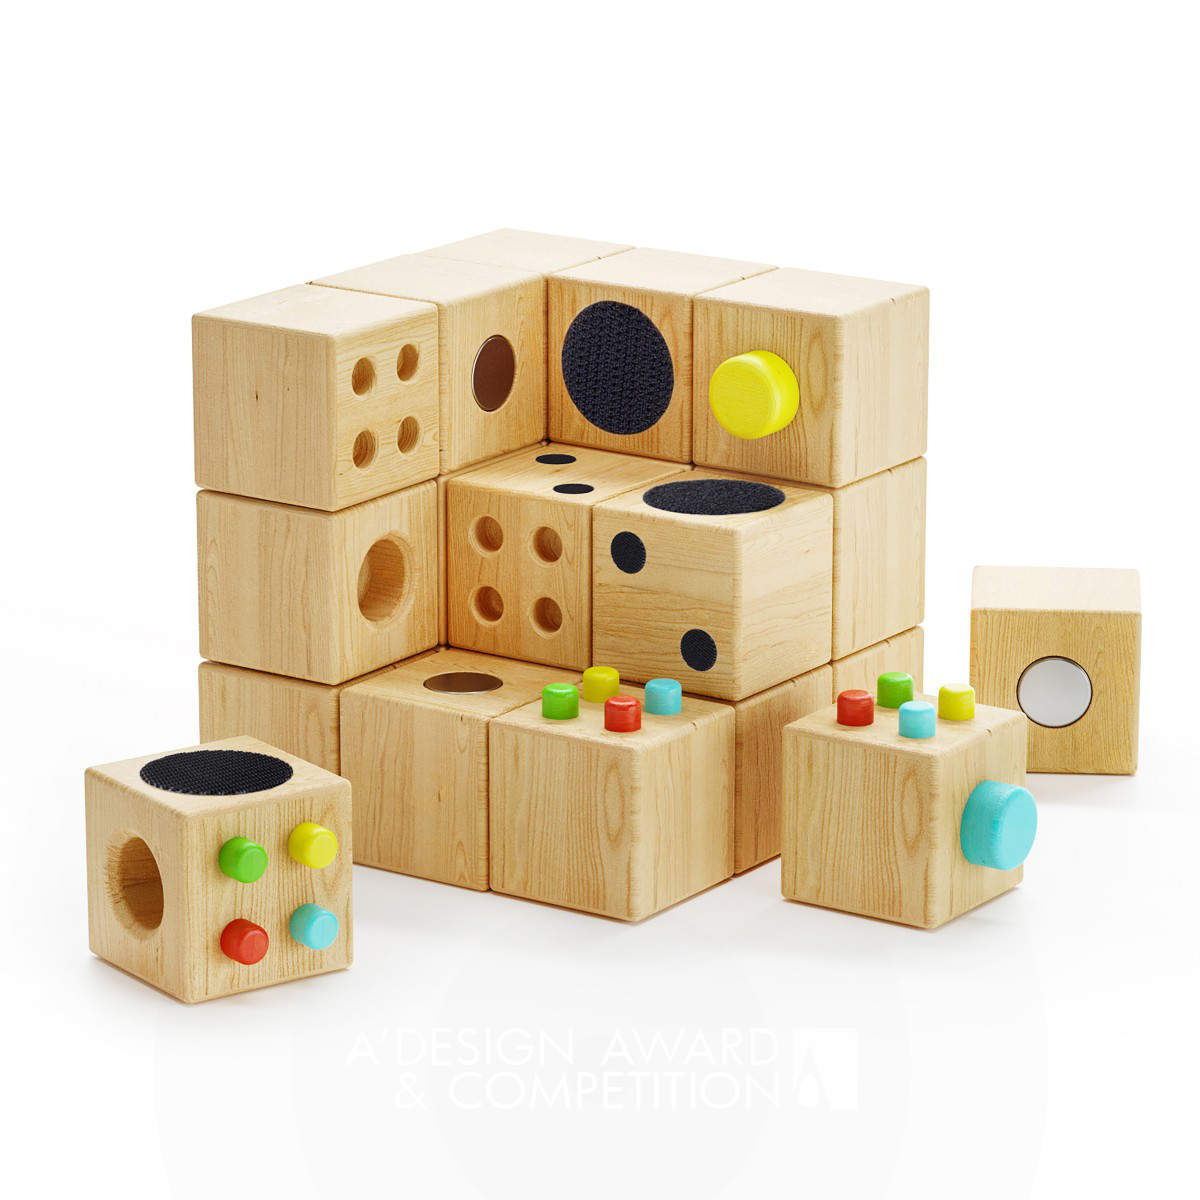 Cubecor Wood Toy by Esmail Ghadrdani Silver Toys, Games and Hobby Products Design Award Winner 2021 